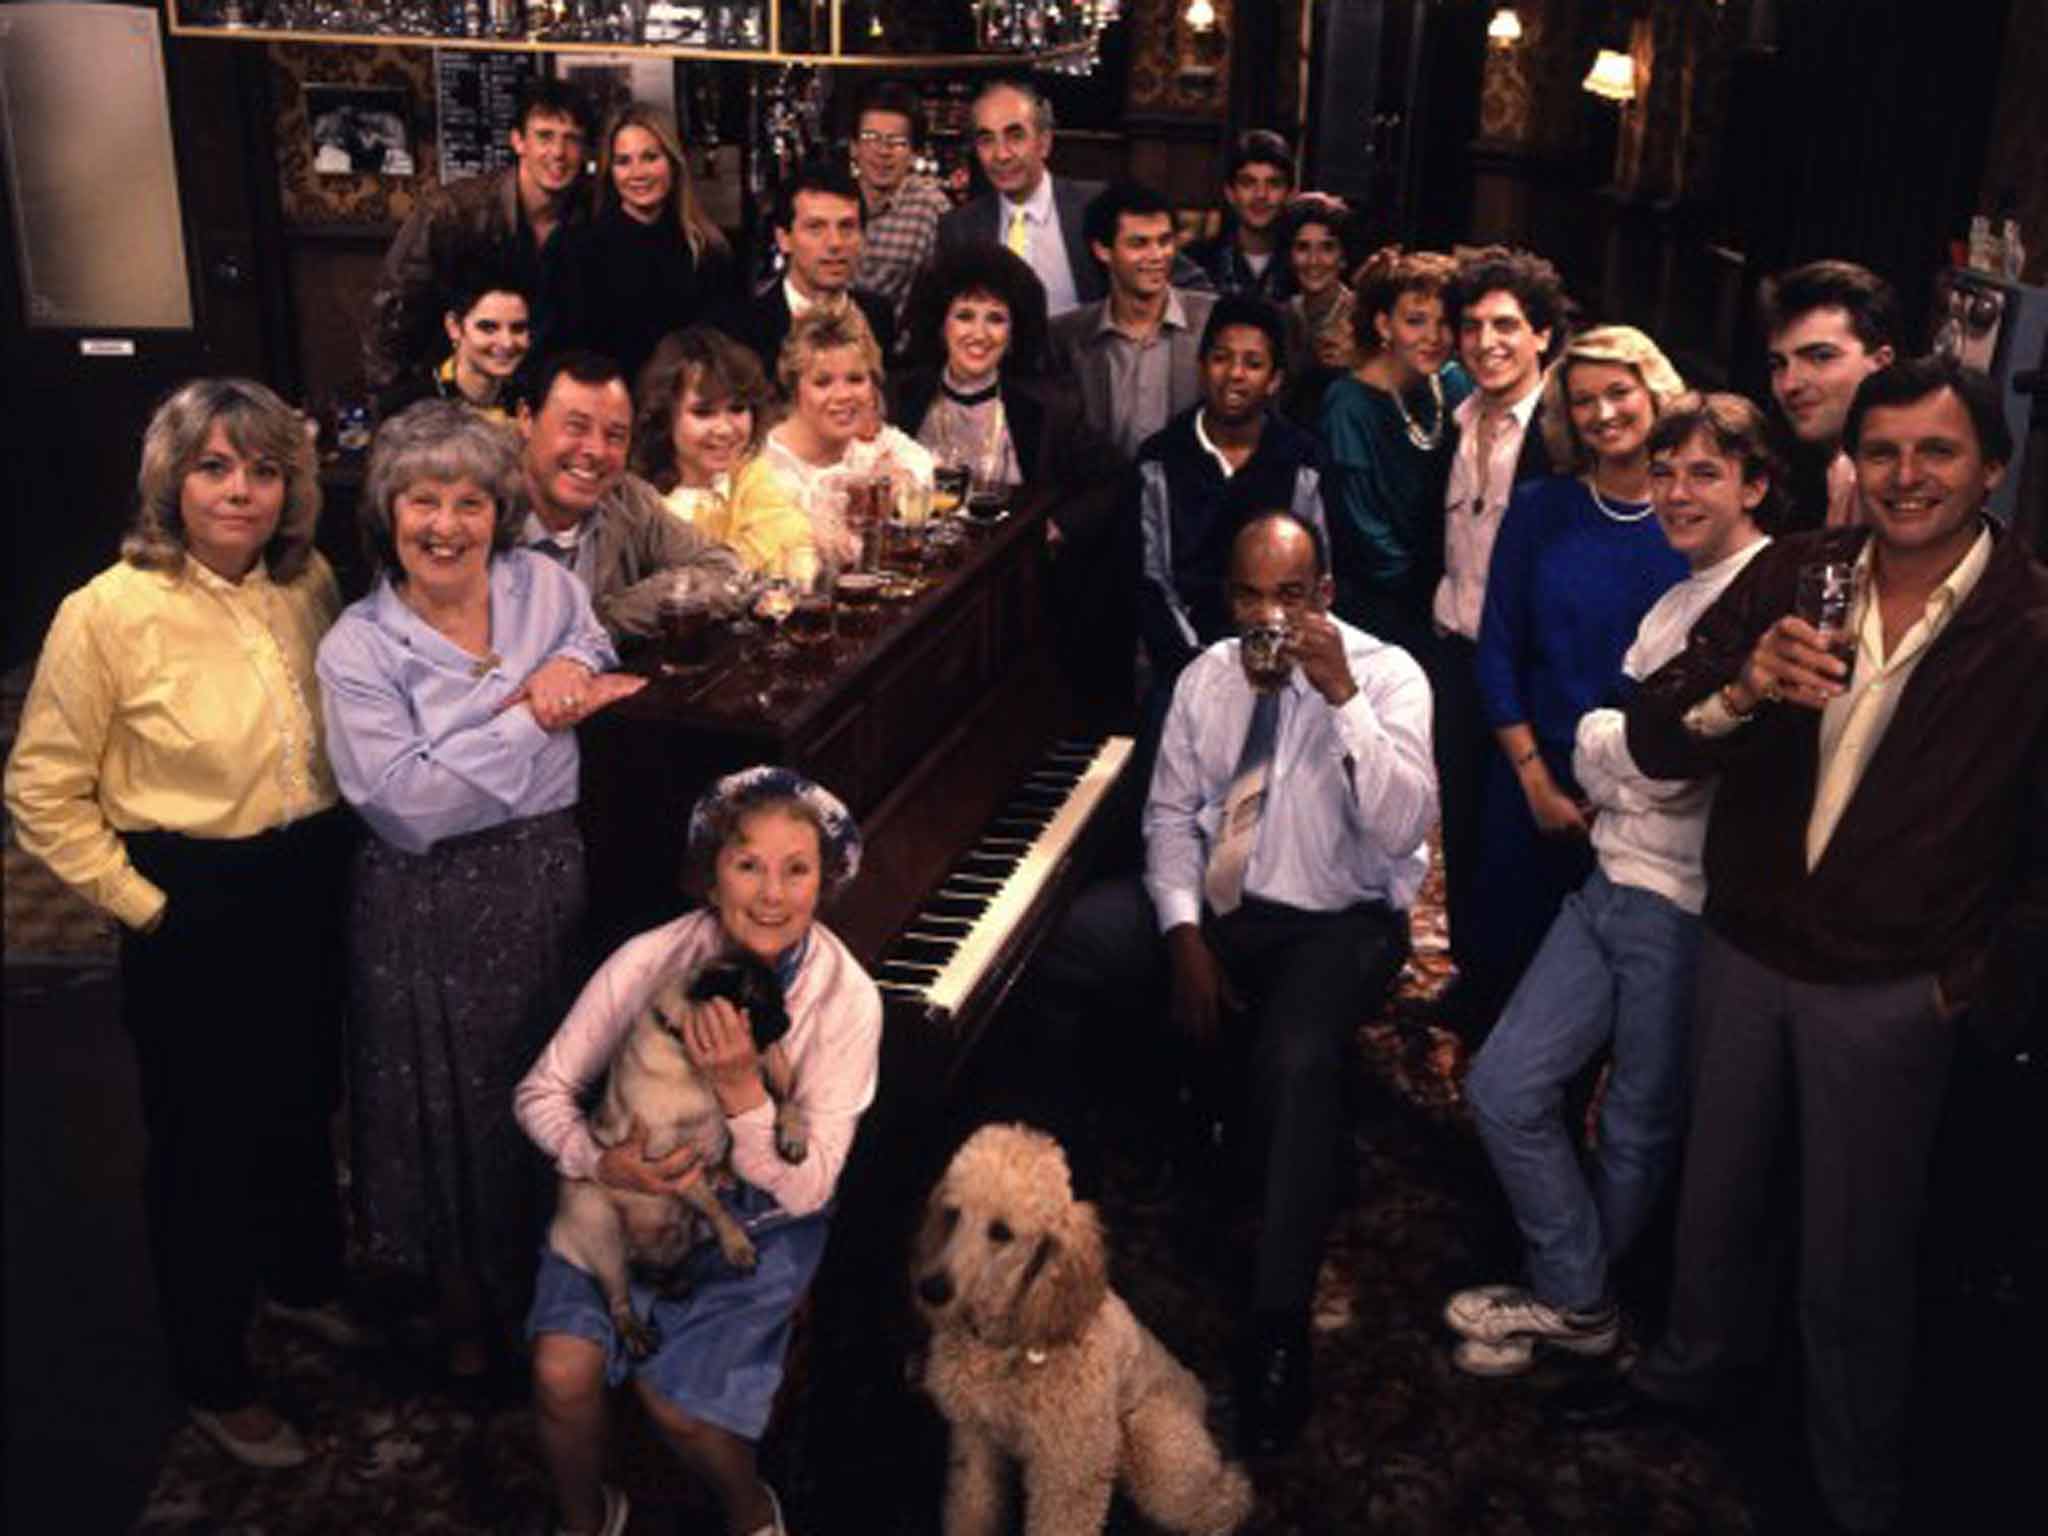 The original line-up of 'EastEnders' in 1985, including Den and AngieWatts and 'Nasty' Nick